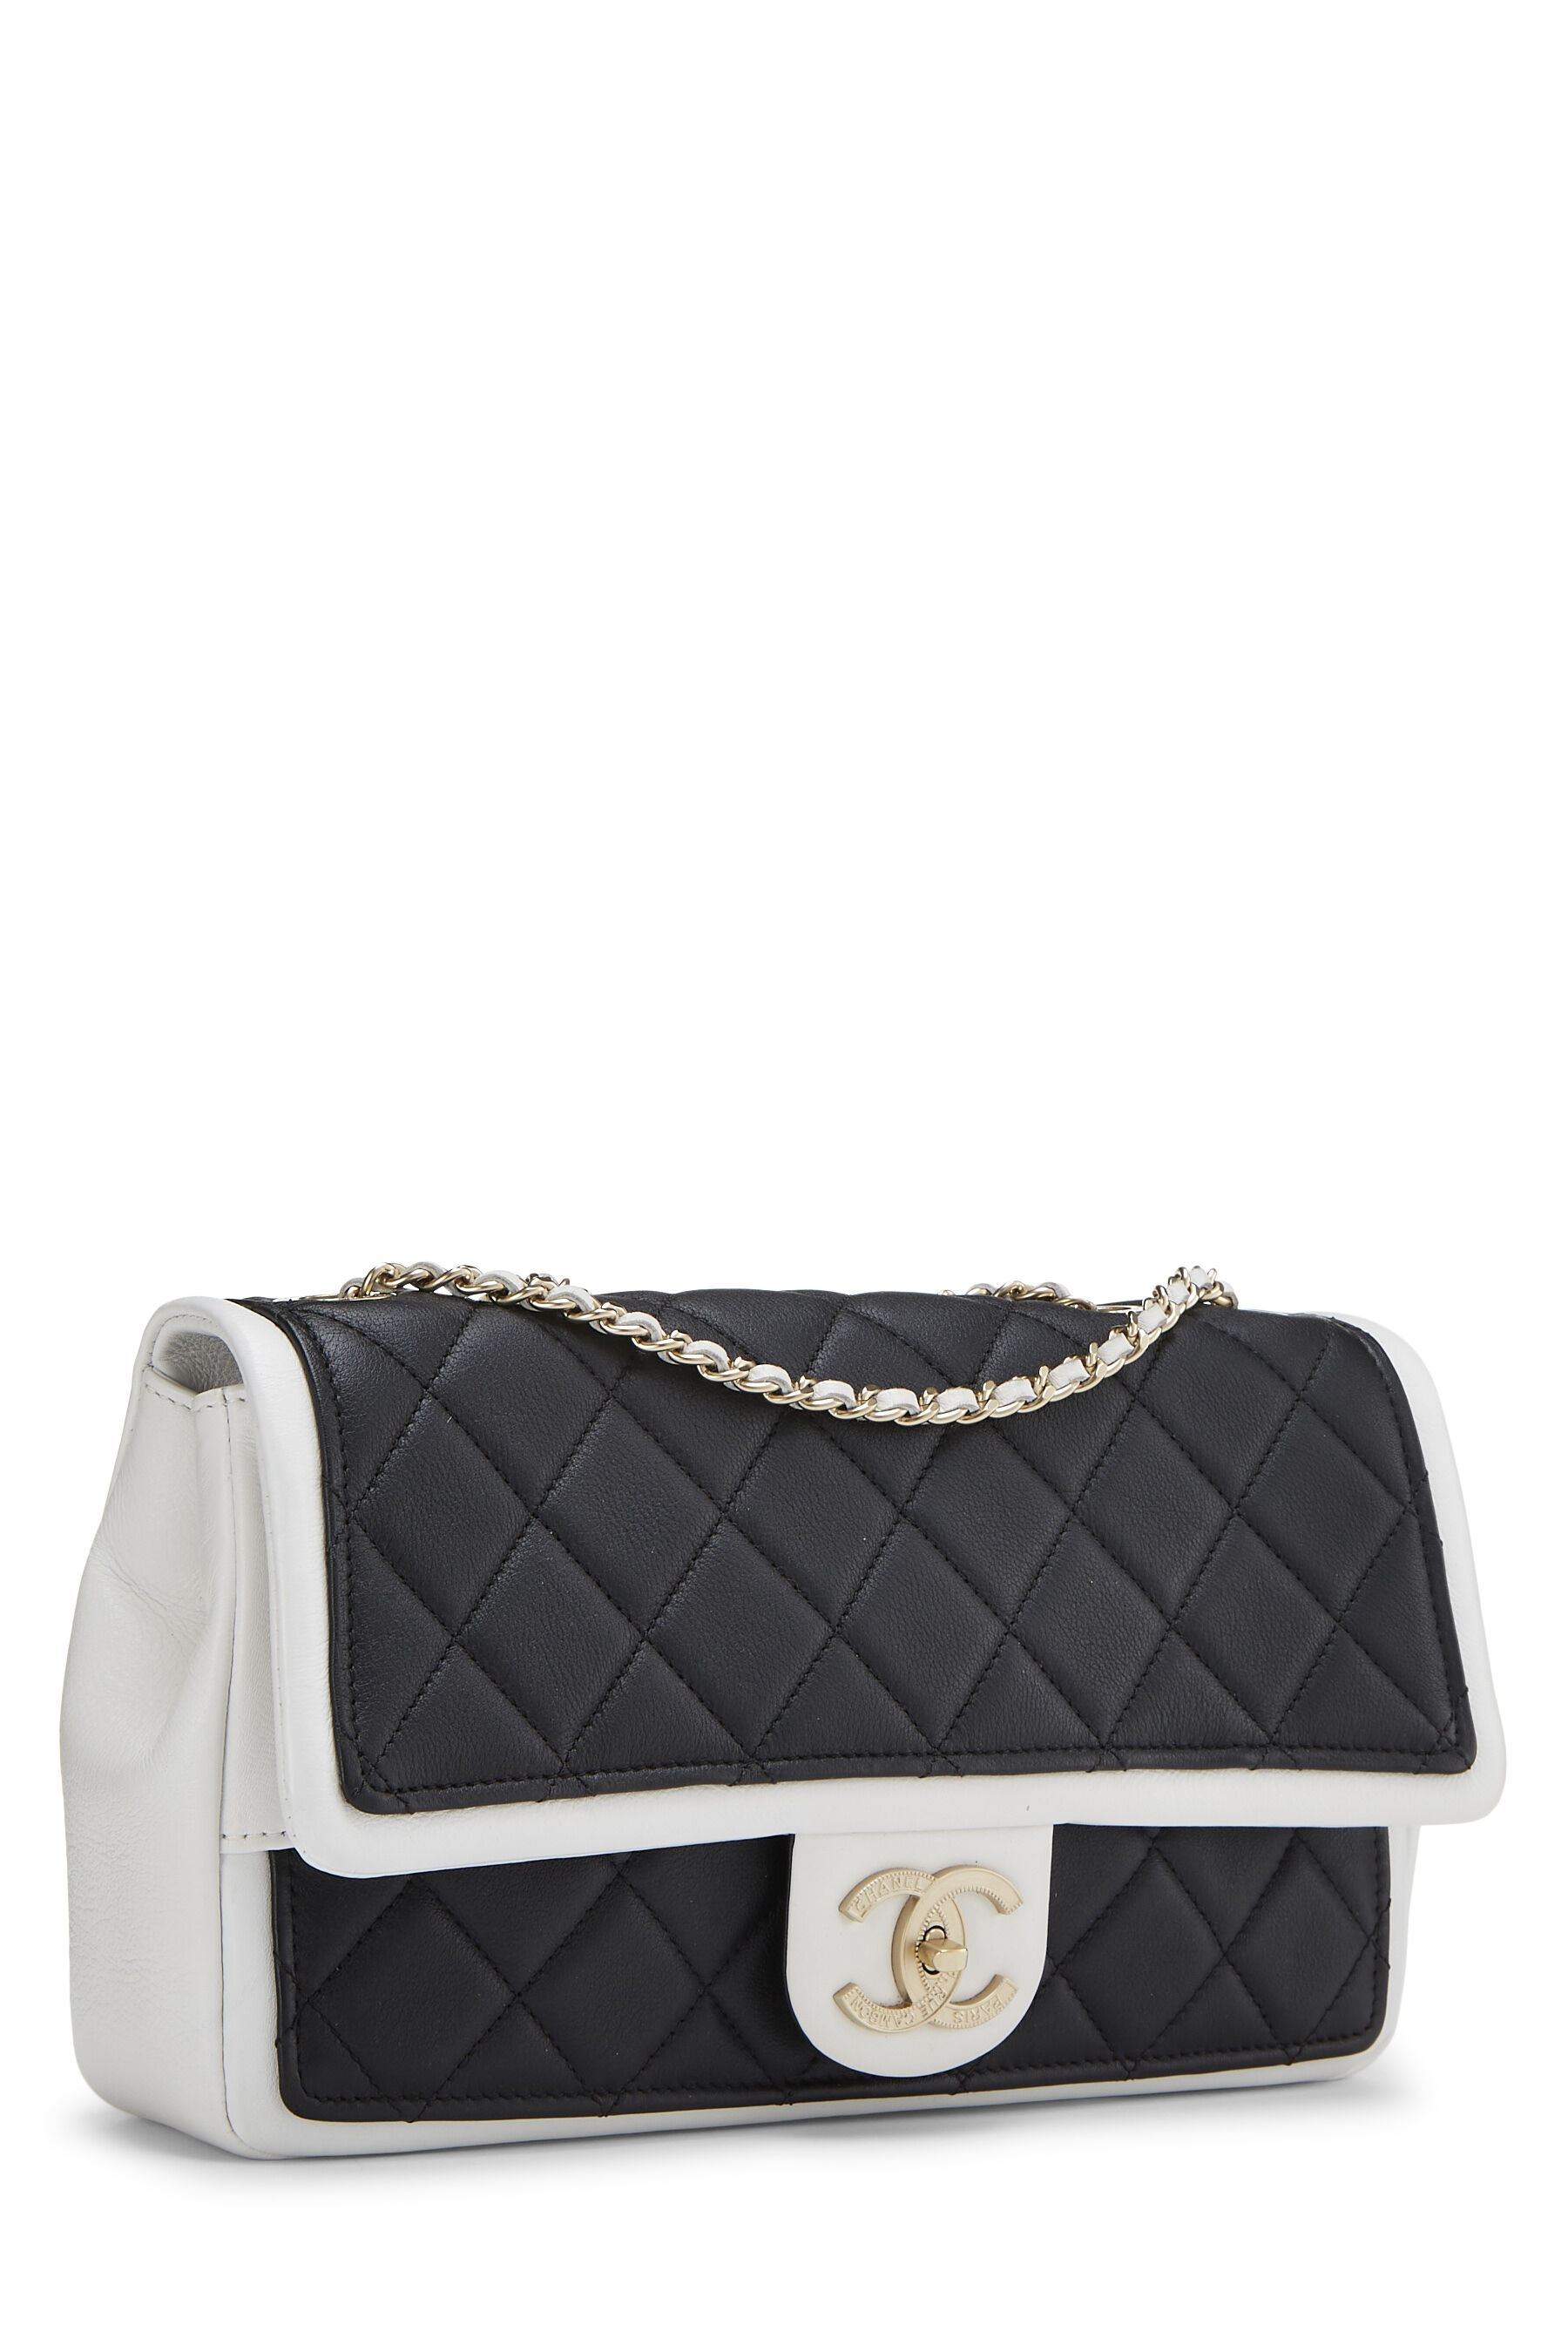 chanel bag white and black